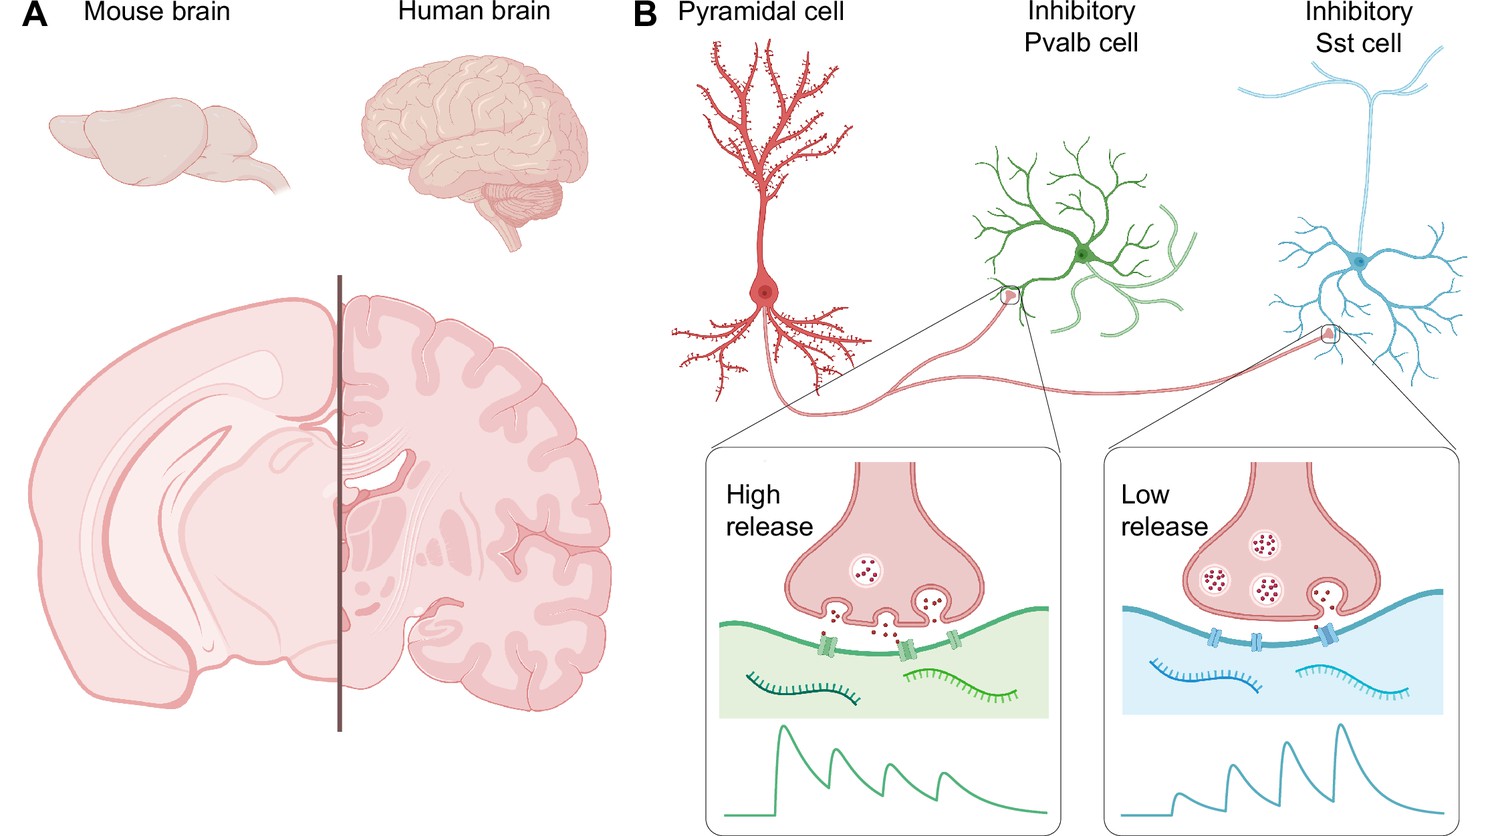 Neural Circuits: Comparing mouse and human brains